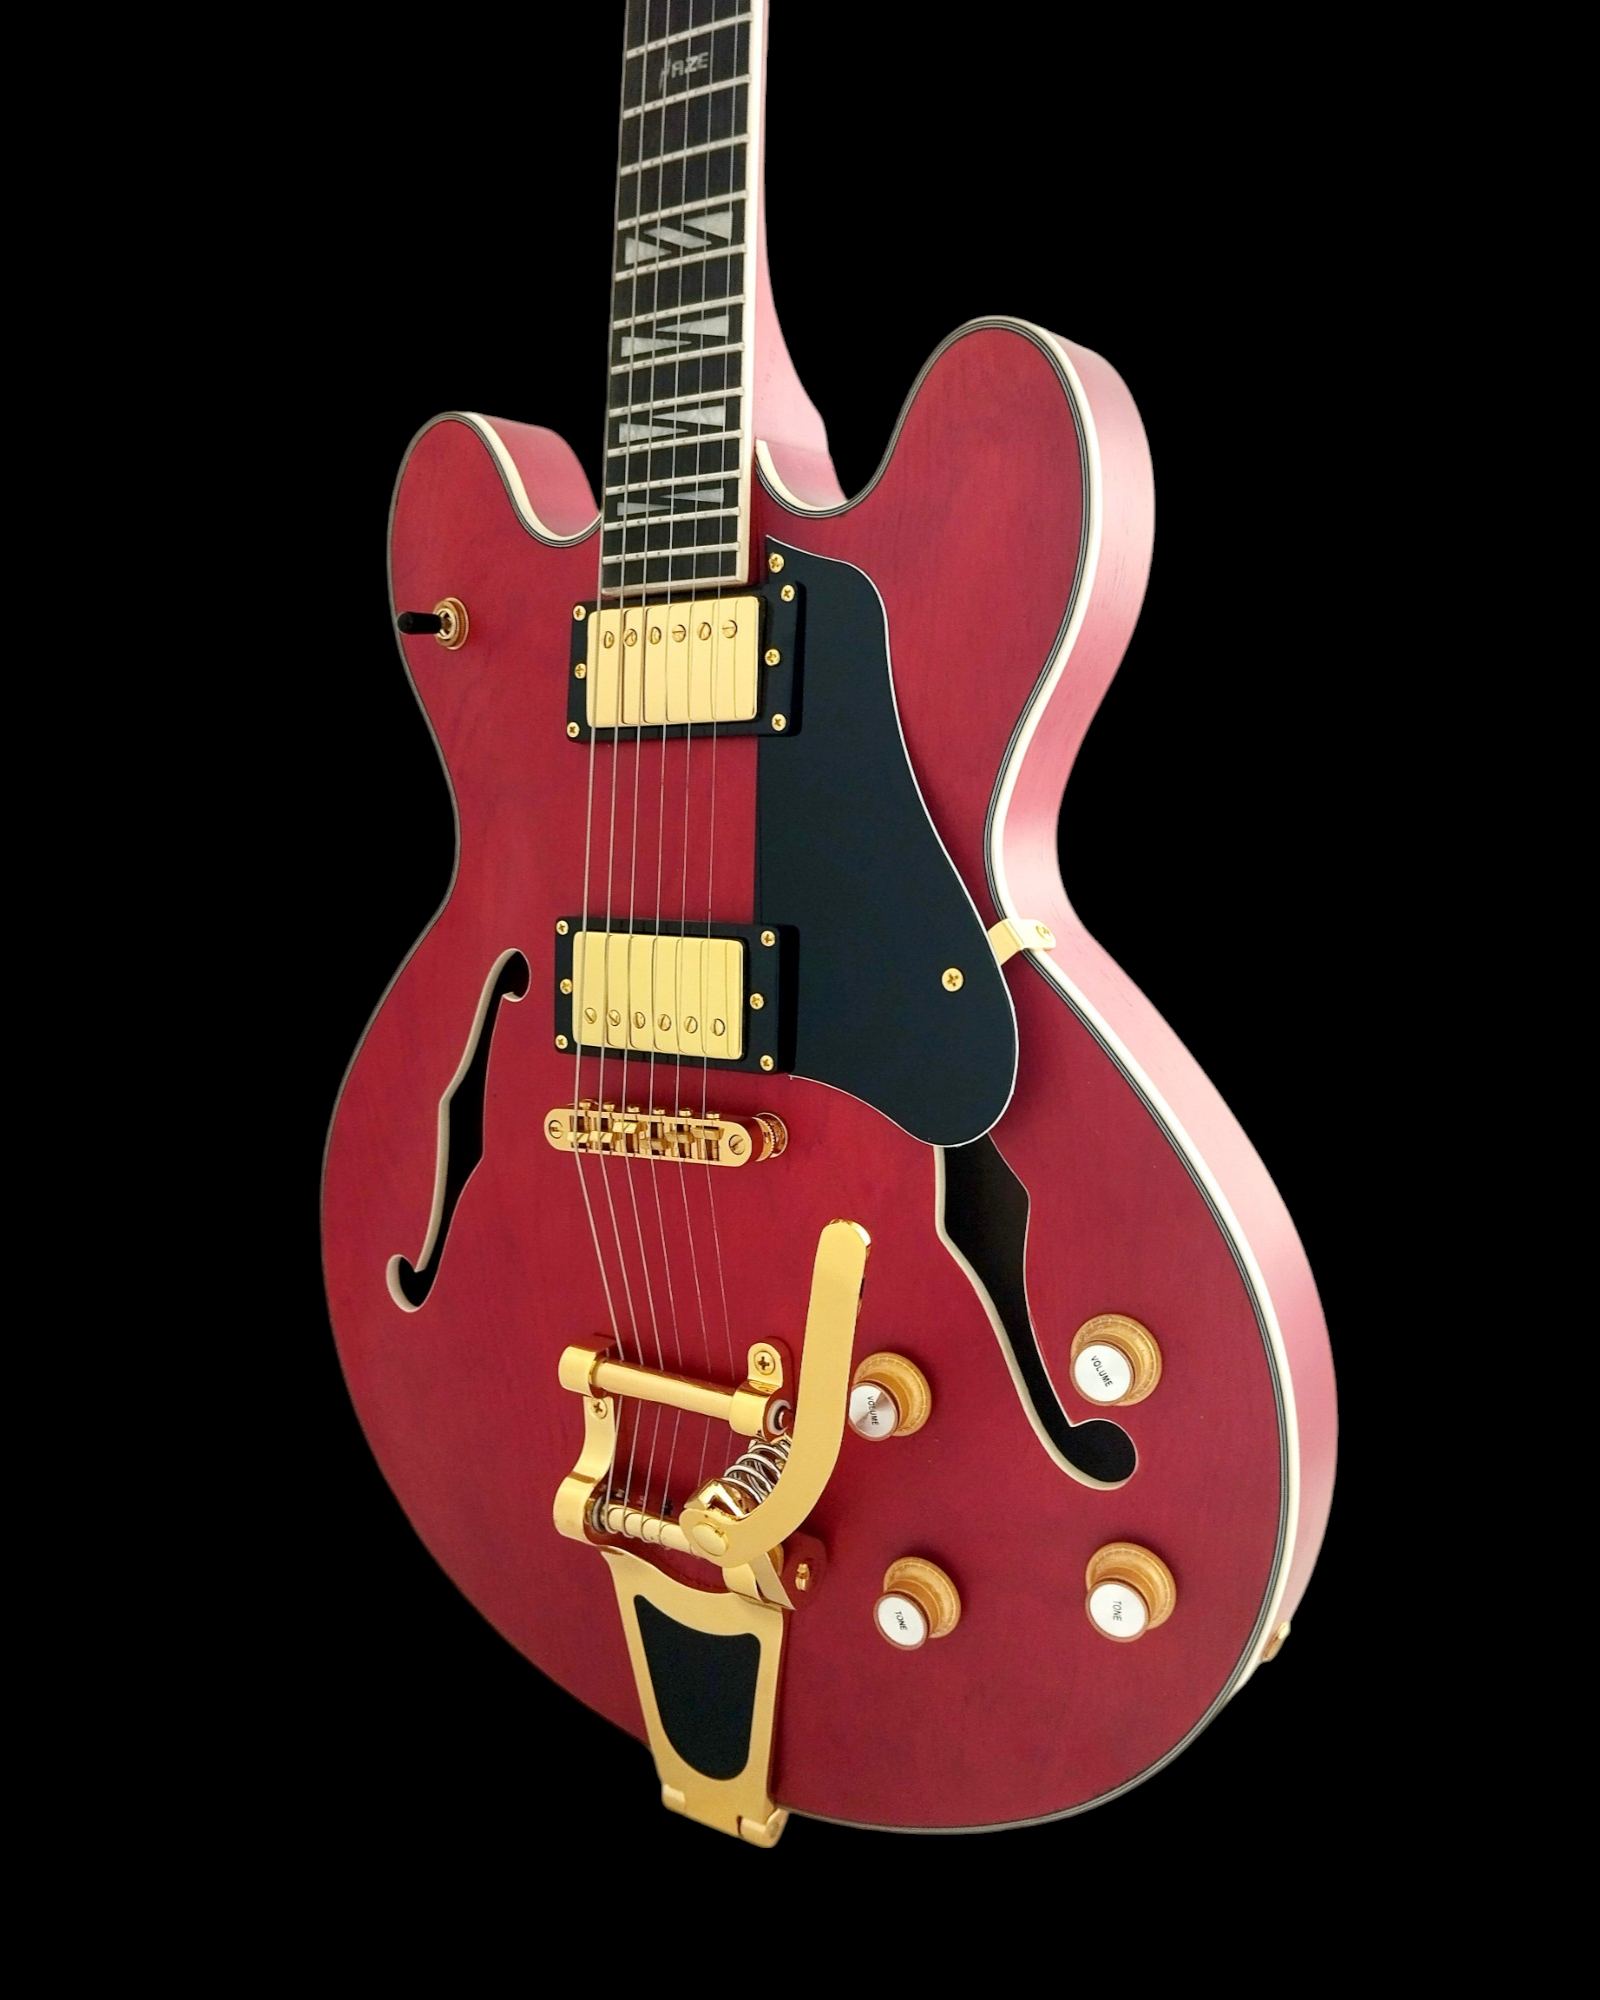 Haze Semi-Hollow 335-Style Bigsby Tremolo HES Electric Guitar - Red SEG1975WRDS